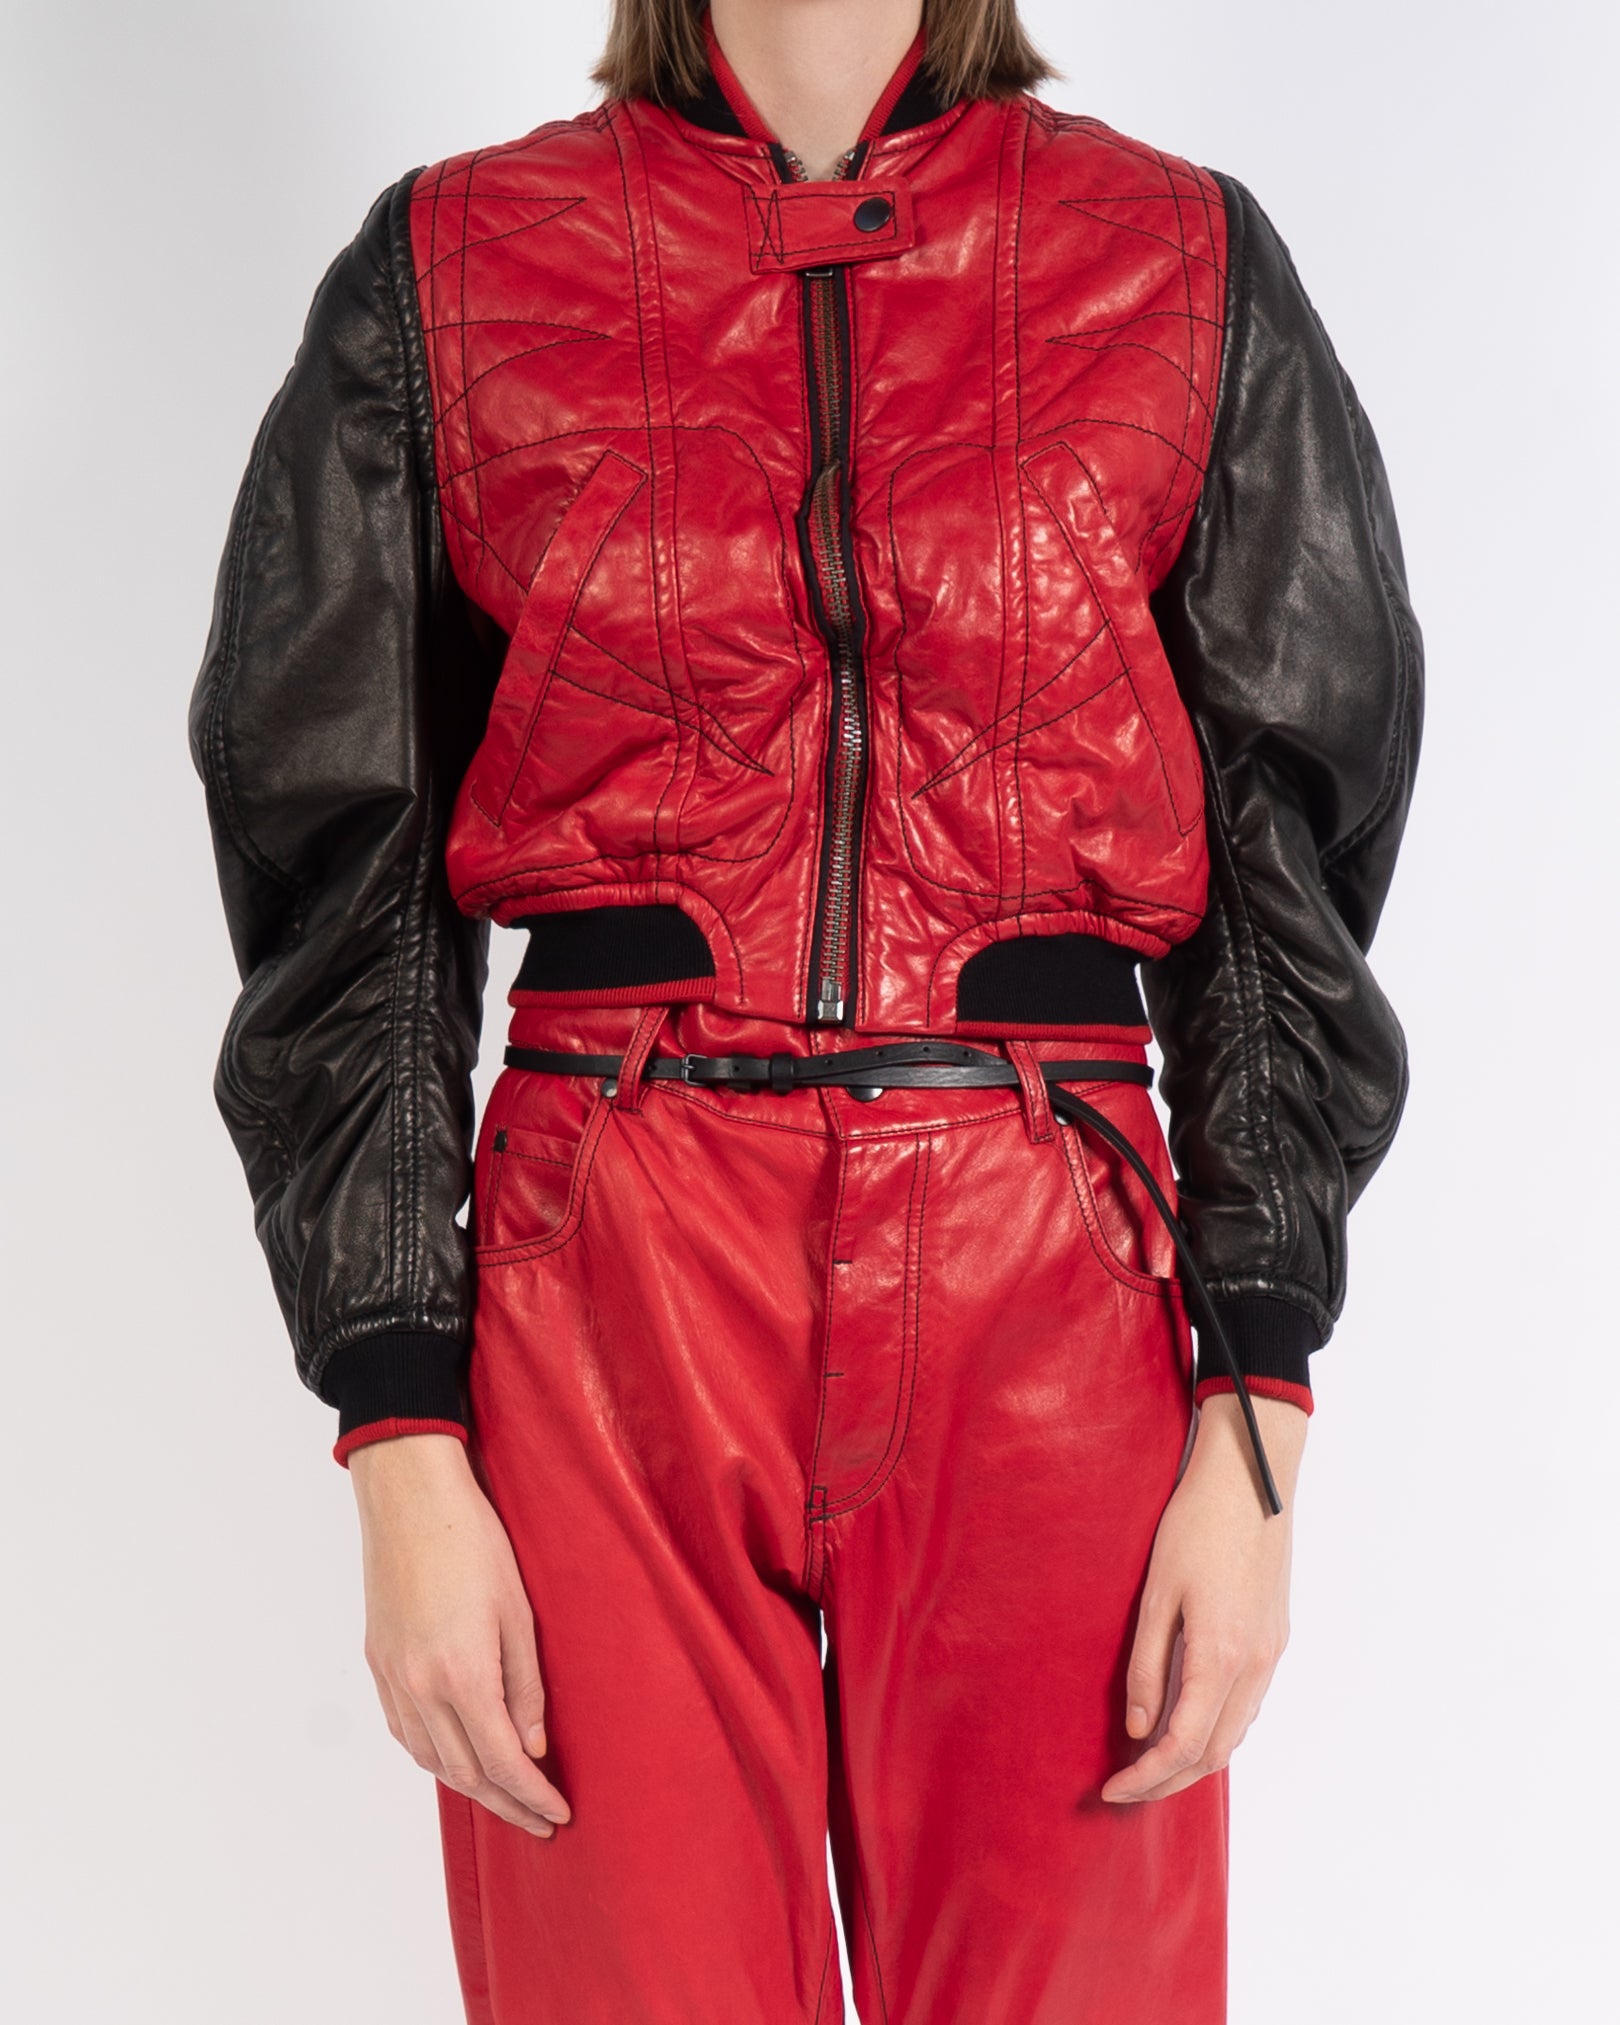 SS18 Red Leather Bomber Jacket